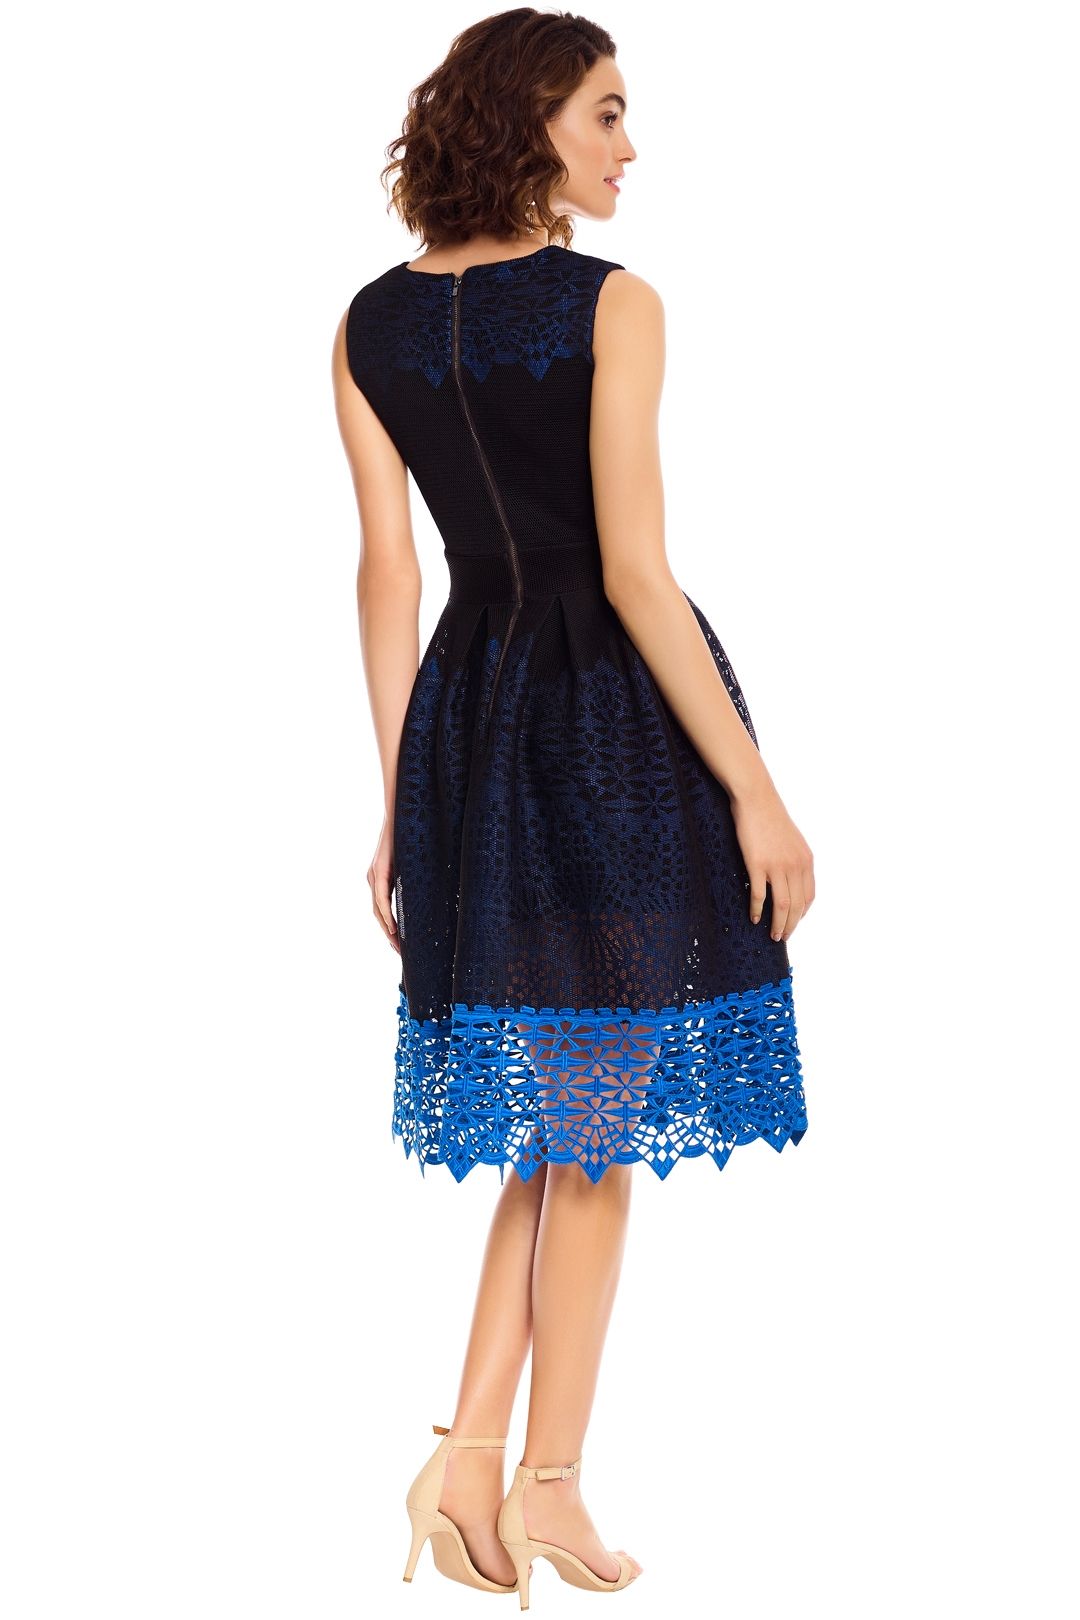 Maje - Russe Honeycomb Knit and Guipure Dress - Navy Blue - Back